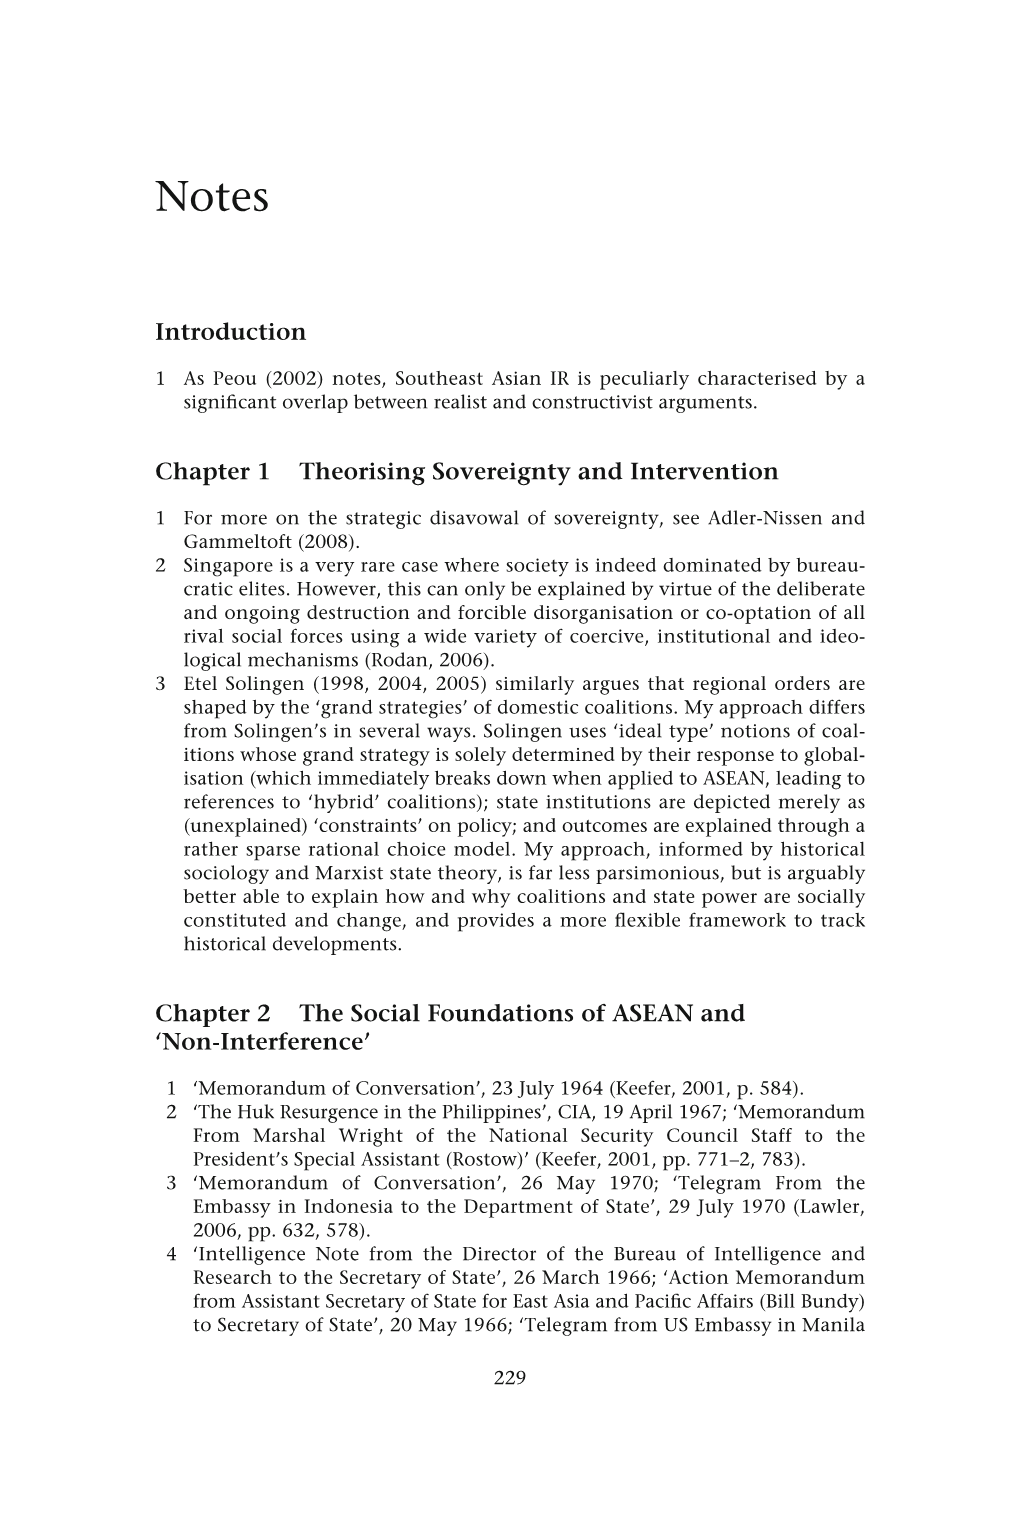 Introduction Chapter 1 Theorising Sovereignty and Intervention